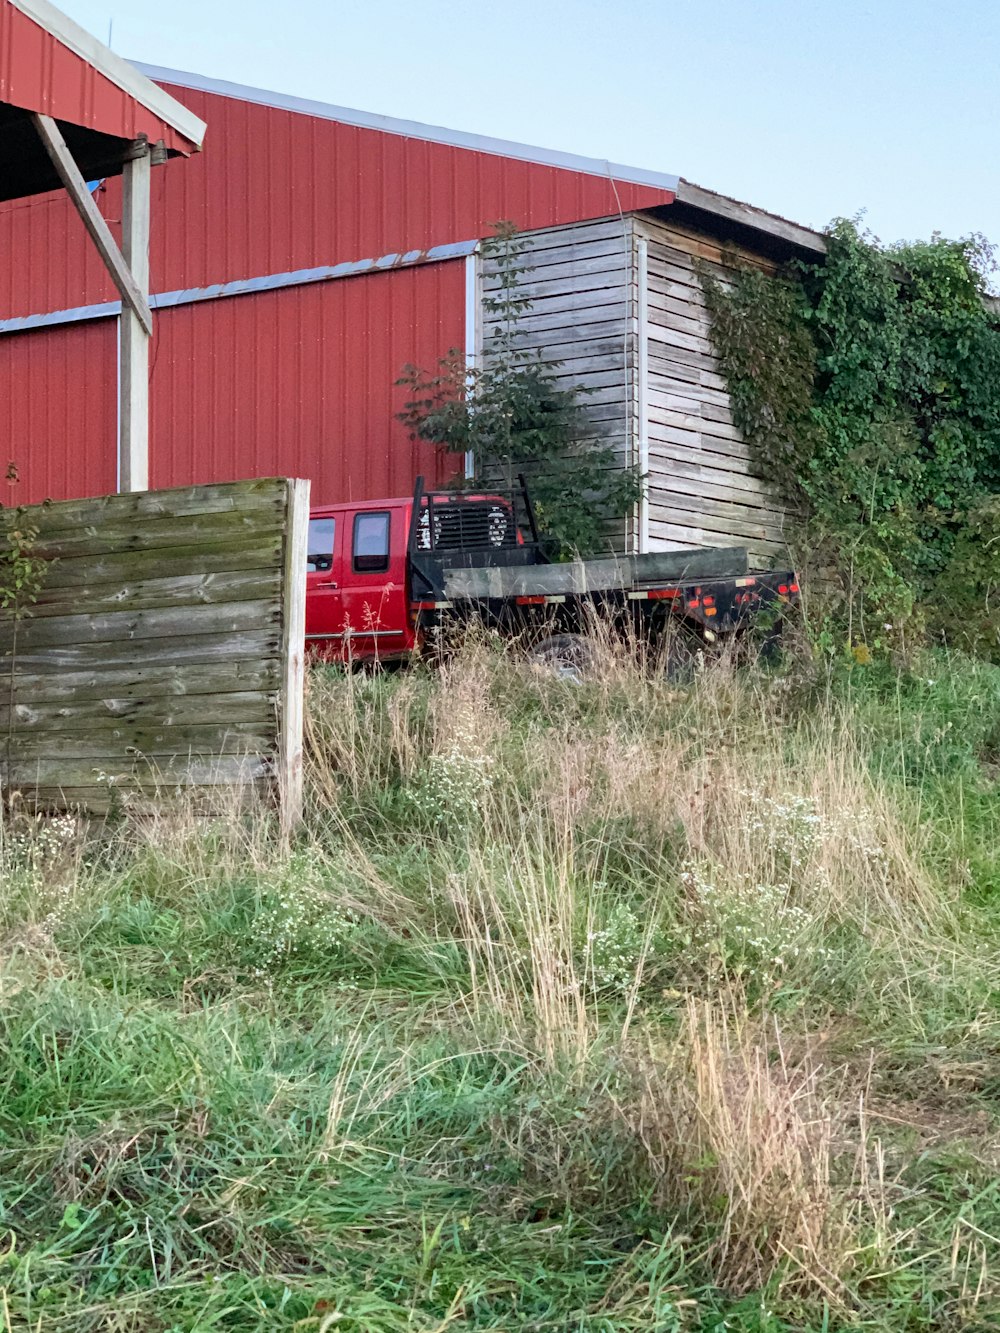 a red truck parked in front of a red barn